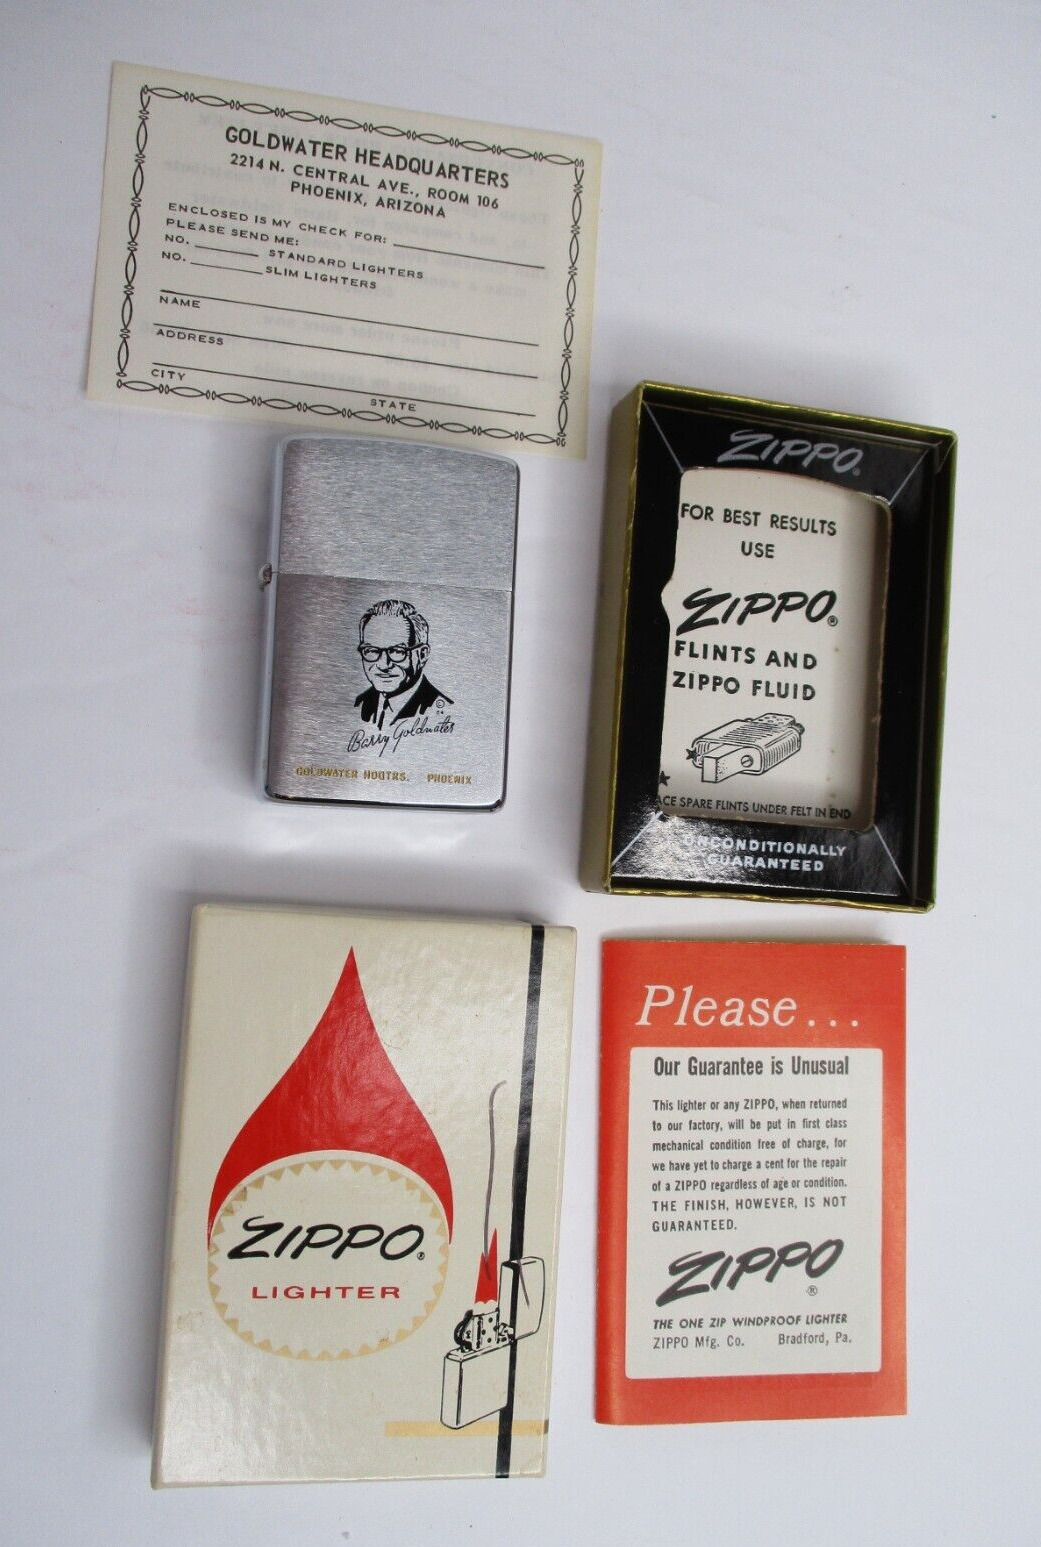 NEW - 1964 Vintage Zippo Lighter Barry Goldwater Presidential Candidate Campaign